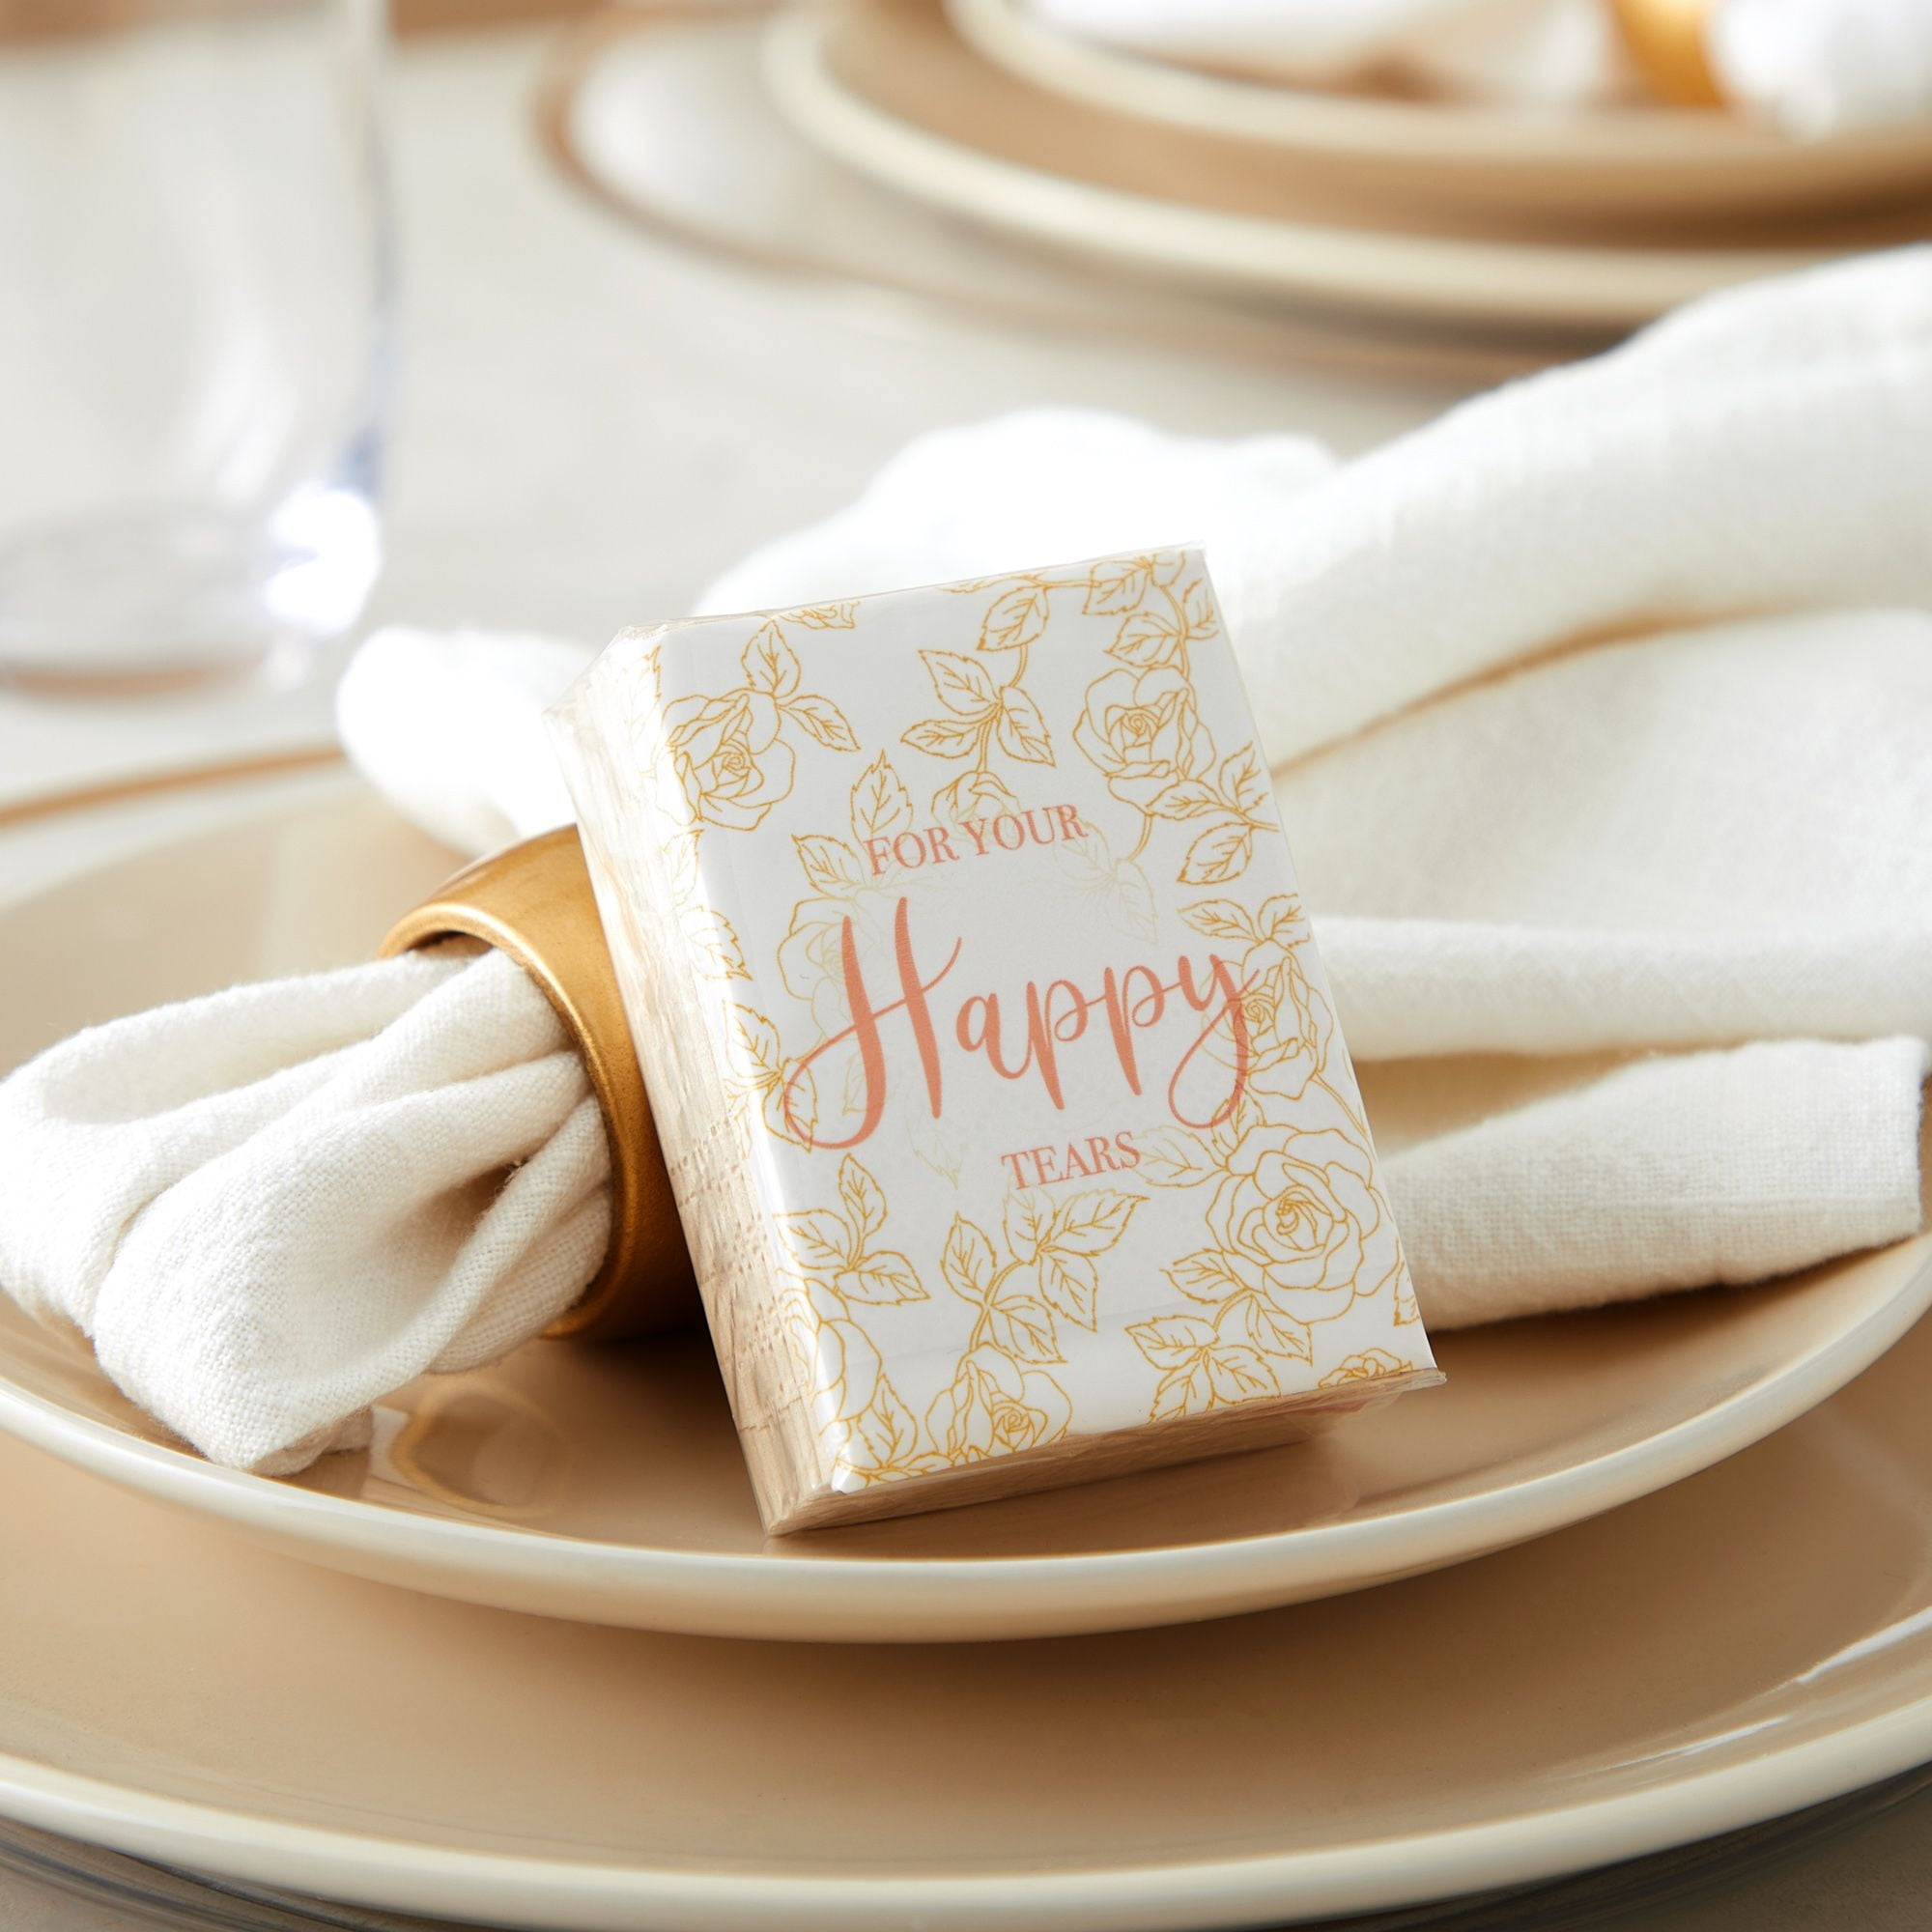  Wedding Tissues Packs For Guests- Set Of 80- For Your Happy  Tears Tissues- Wedding Favors For GuestsFrosted-PaperBulk Individual Tissue  Packs & Items For Wedding Welcome Bags By